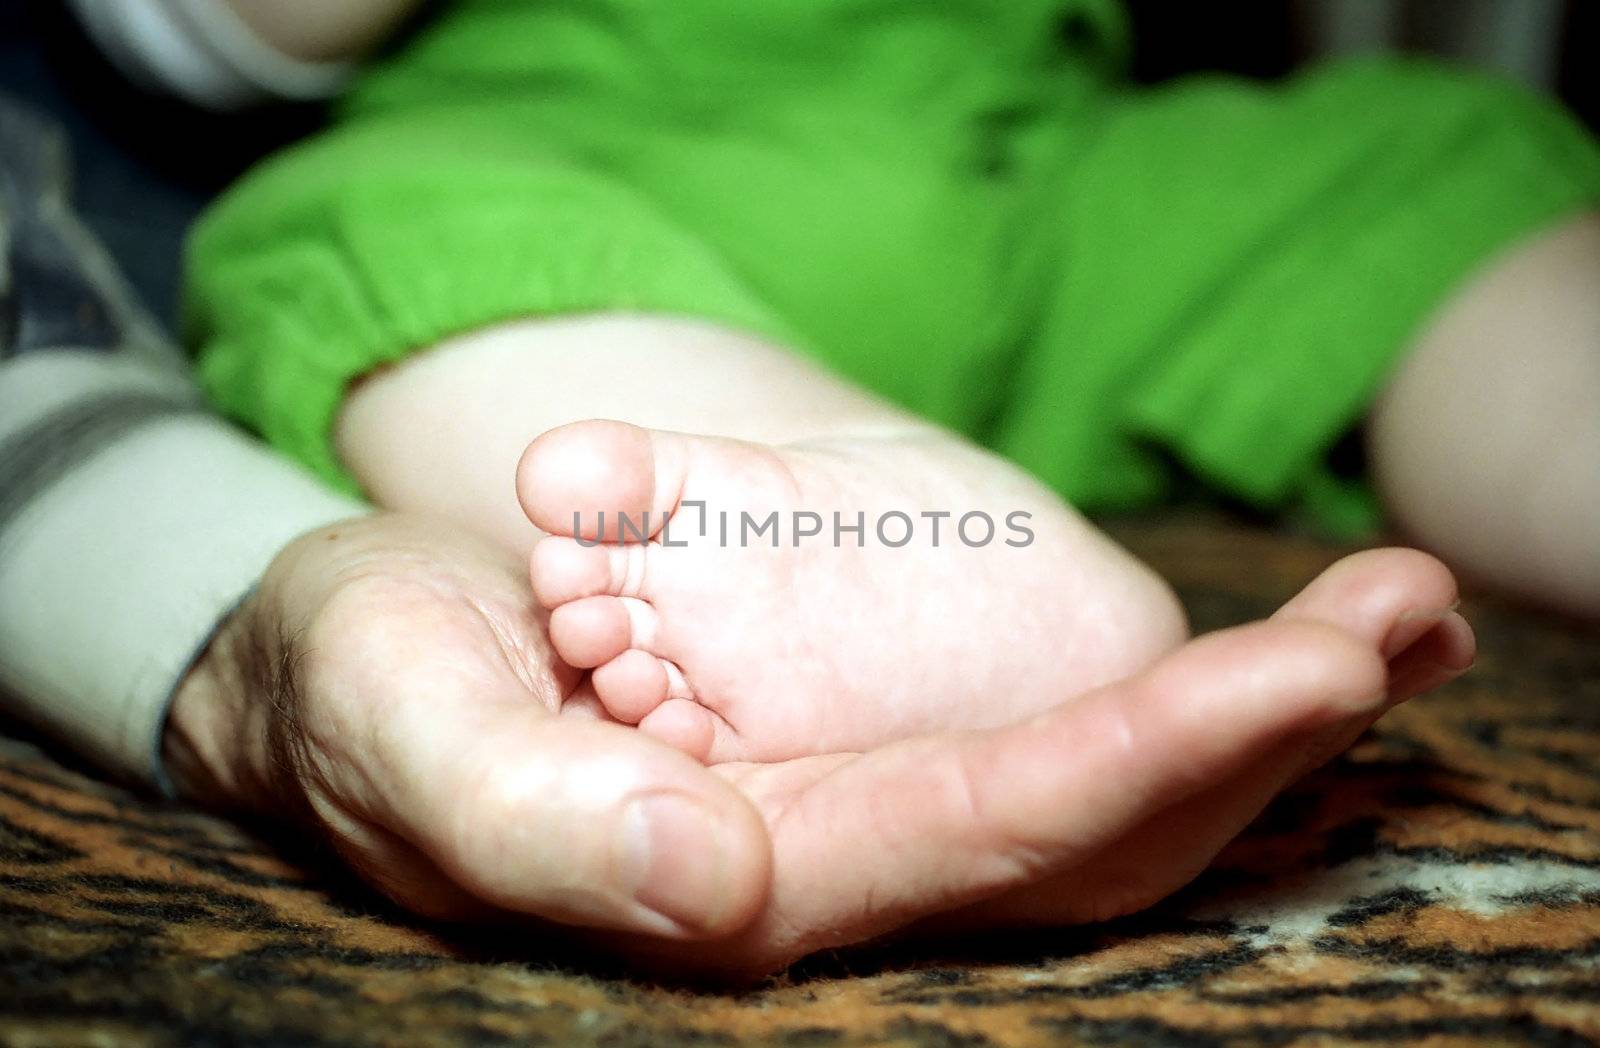 Infant foot on man's palm close up